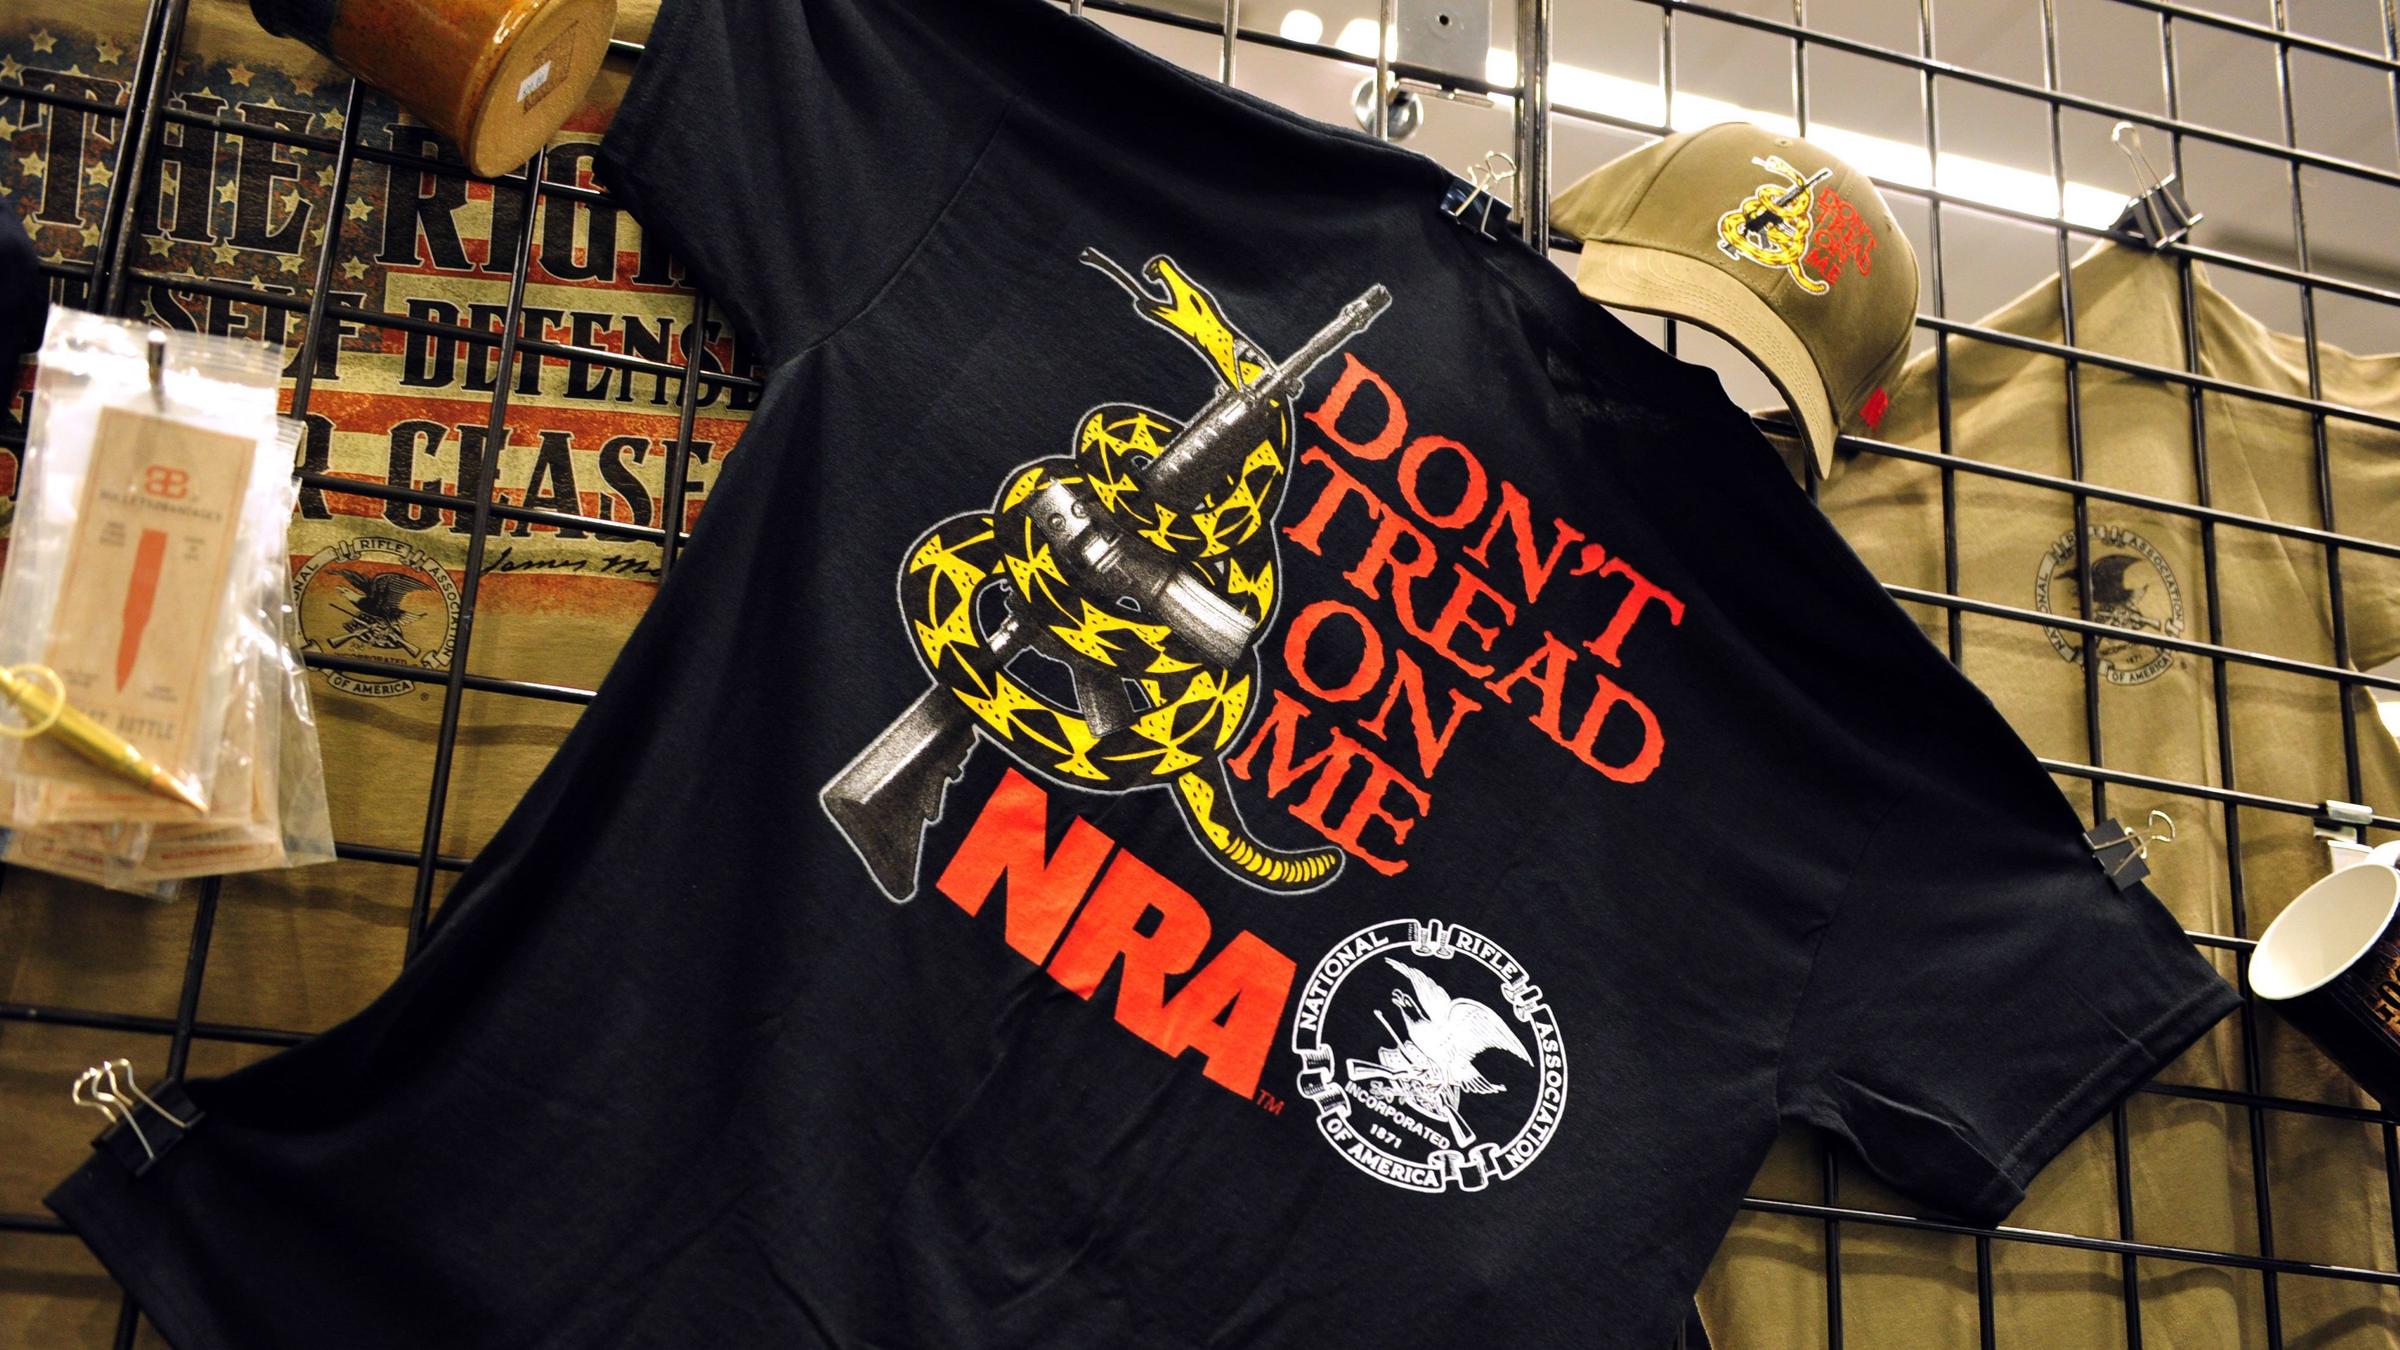 NRA Says It Receives Foreign Funds, But None Goes To